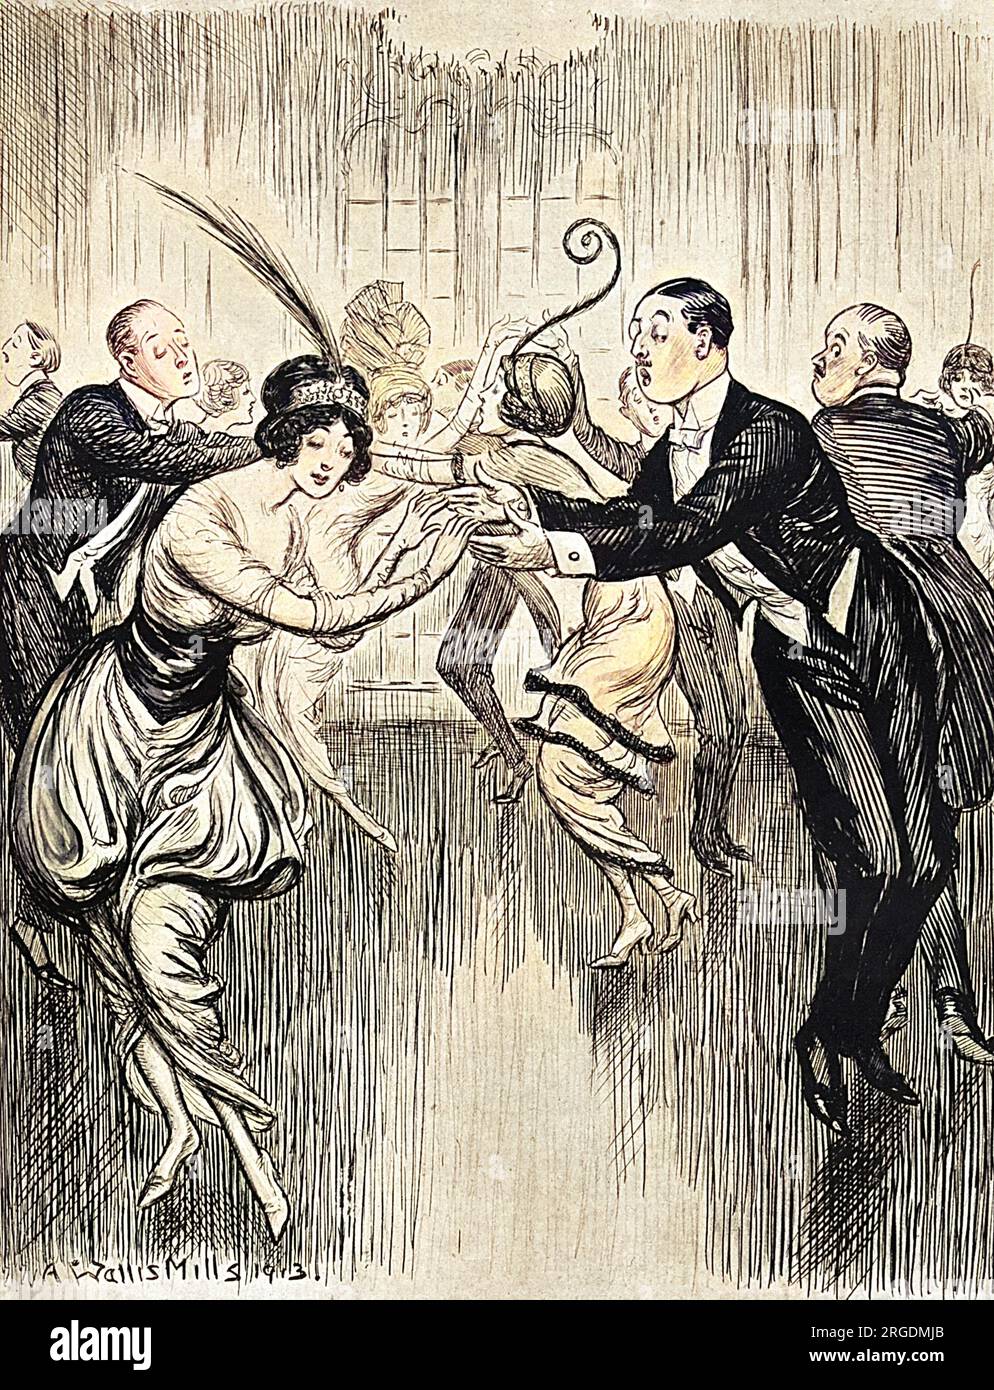 The tango untangled, and made suitable for use in British ballrooms. The Bystander imagines a sanitised version of the tango, suitable for dancing in respectable British ballrooms, with minimum physical contact. Stock Photo